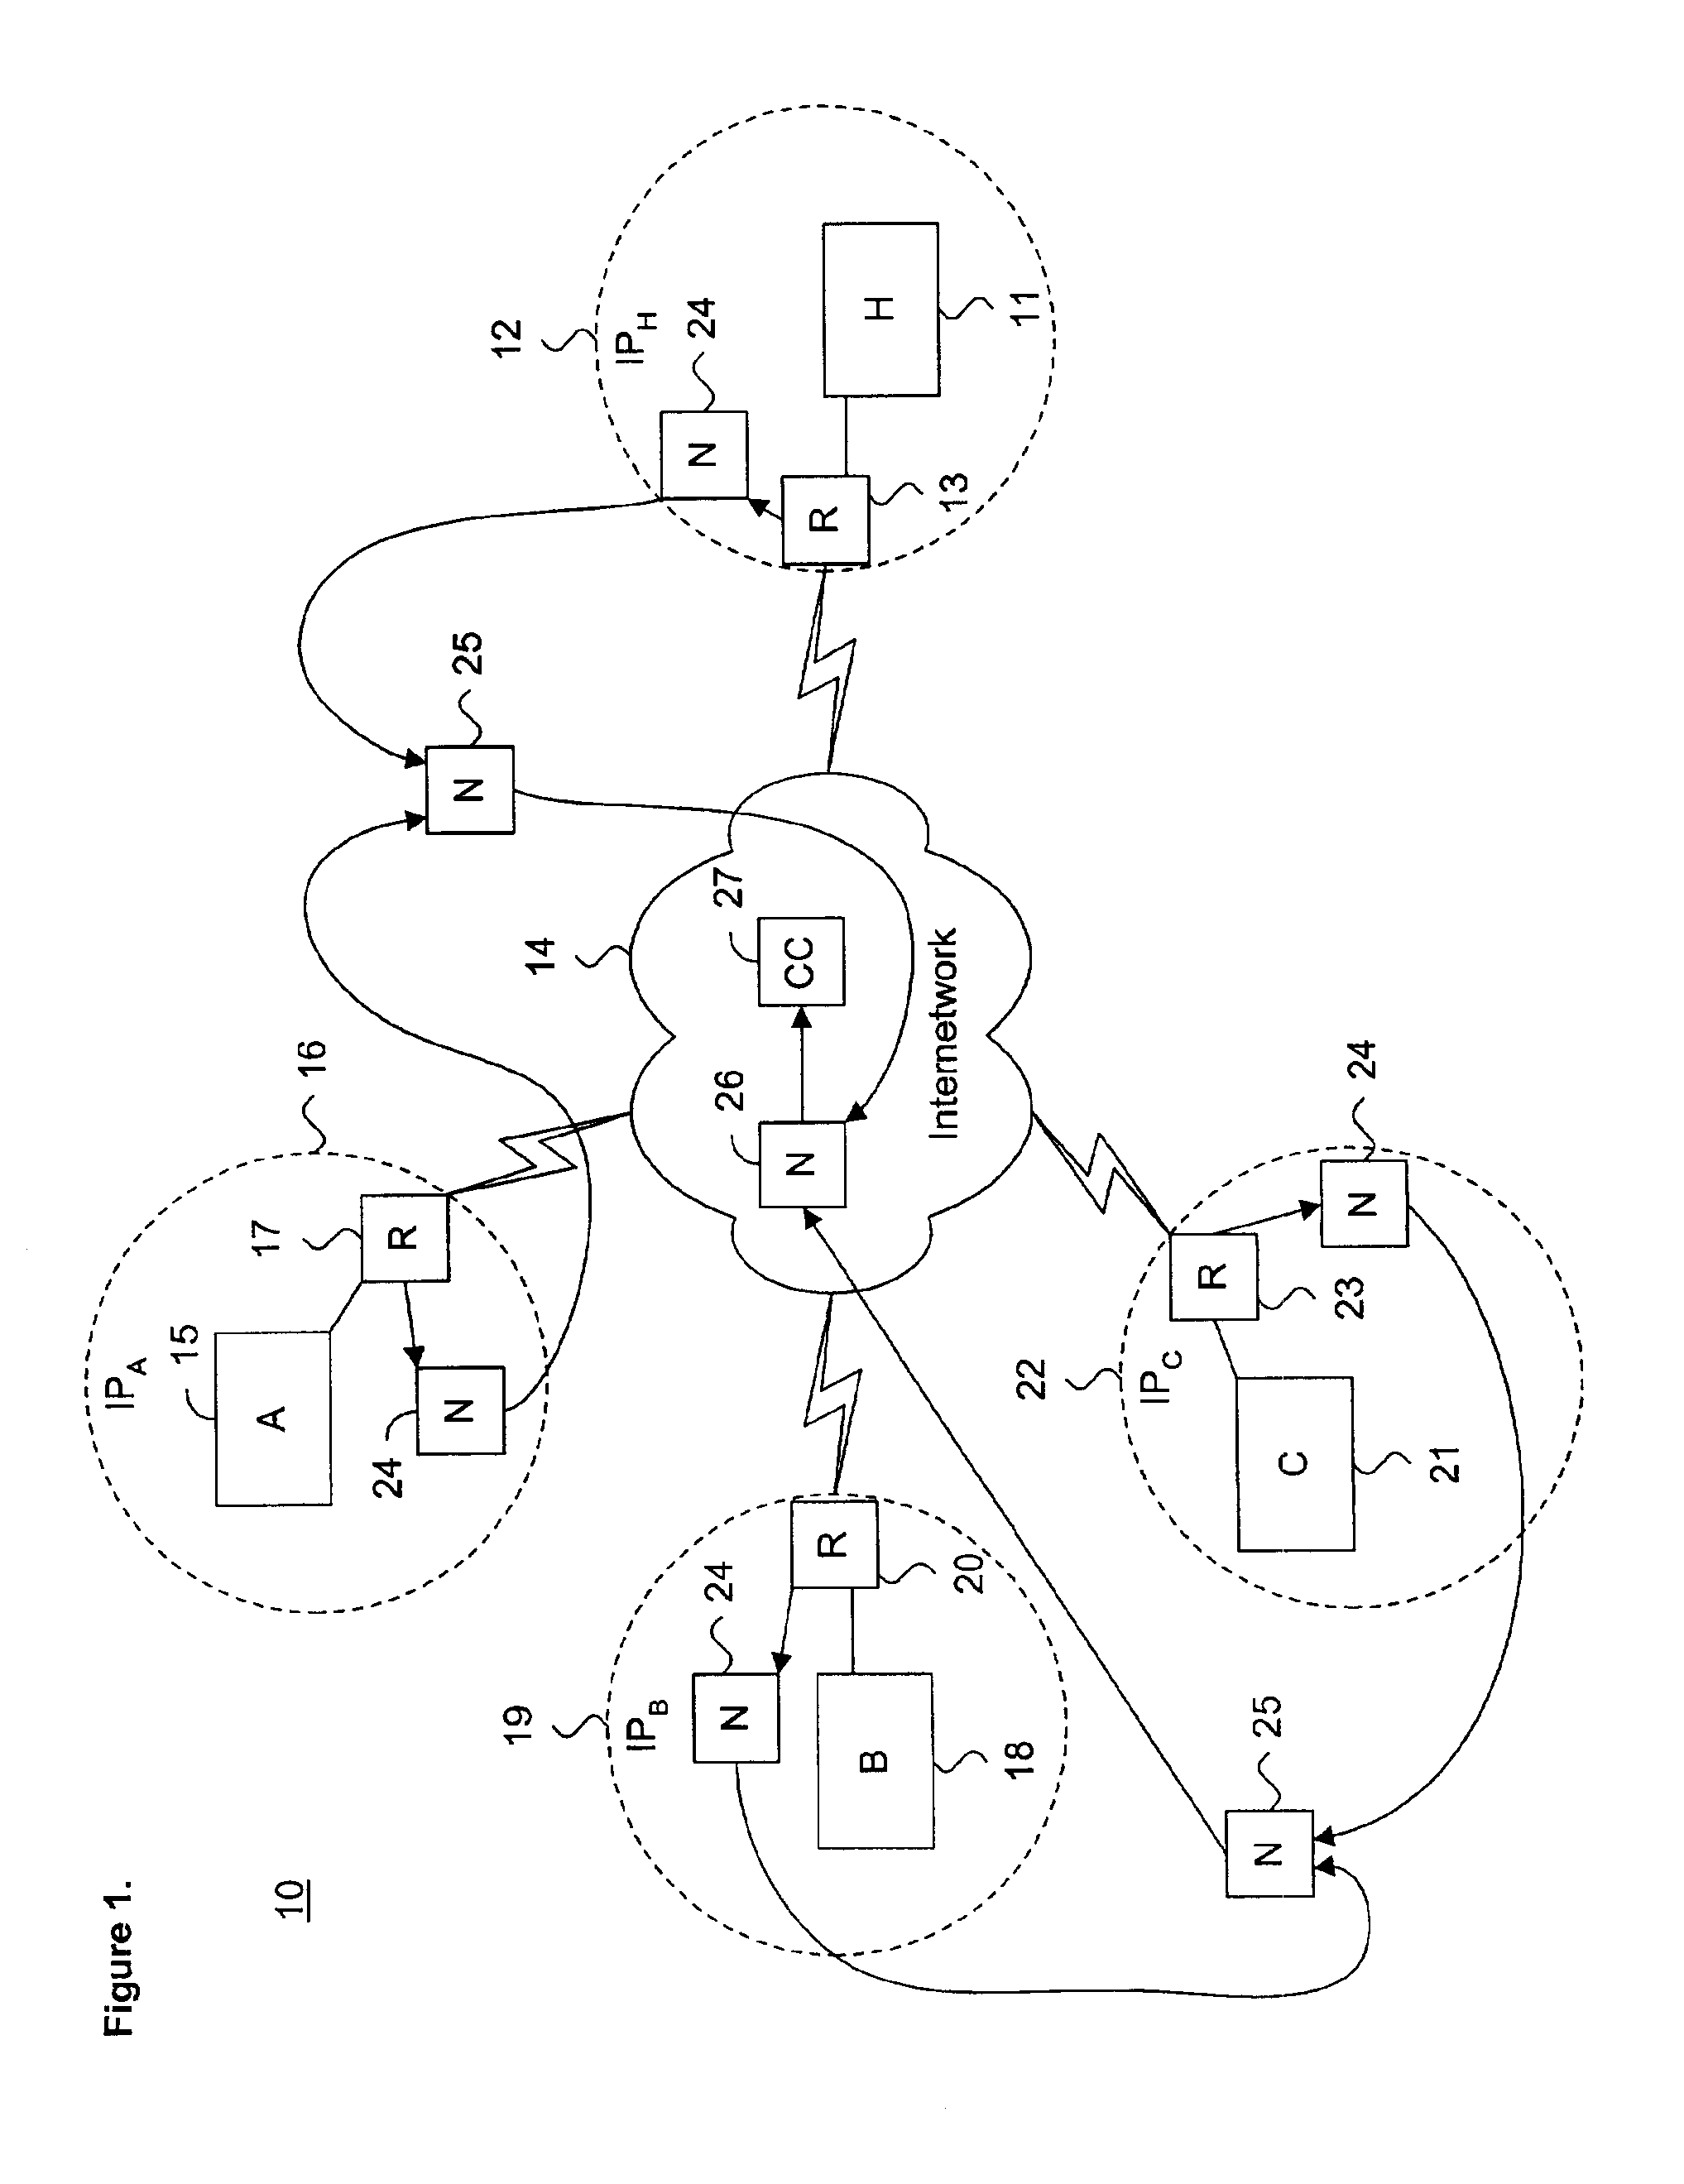 System and method for communicating coalesced rule parameters in a distributed computing environment